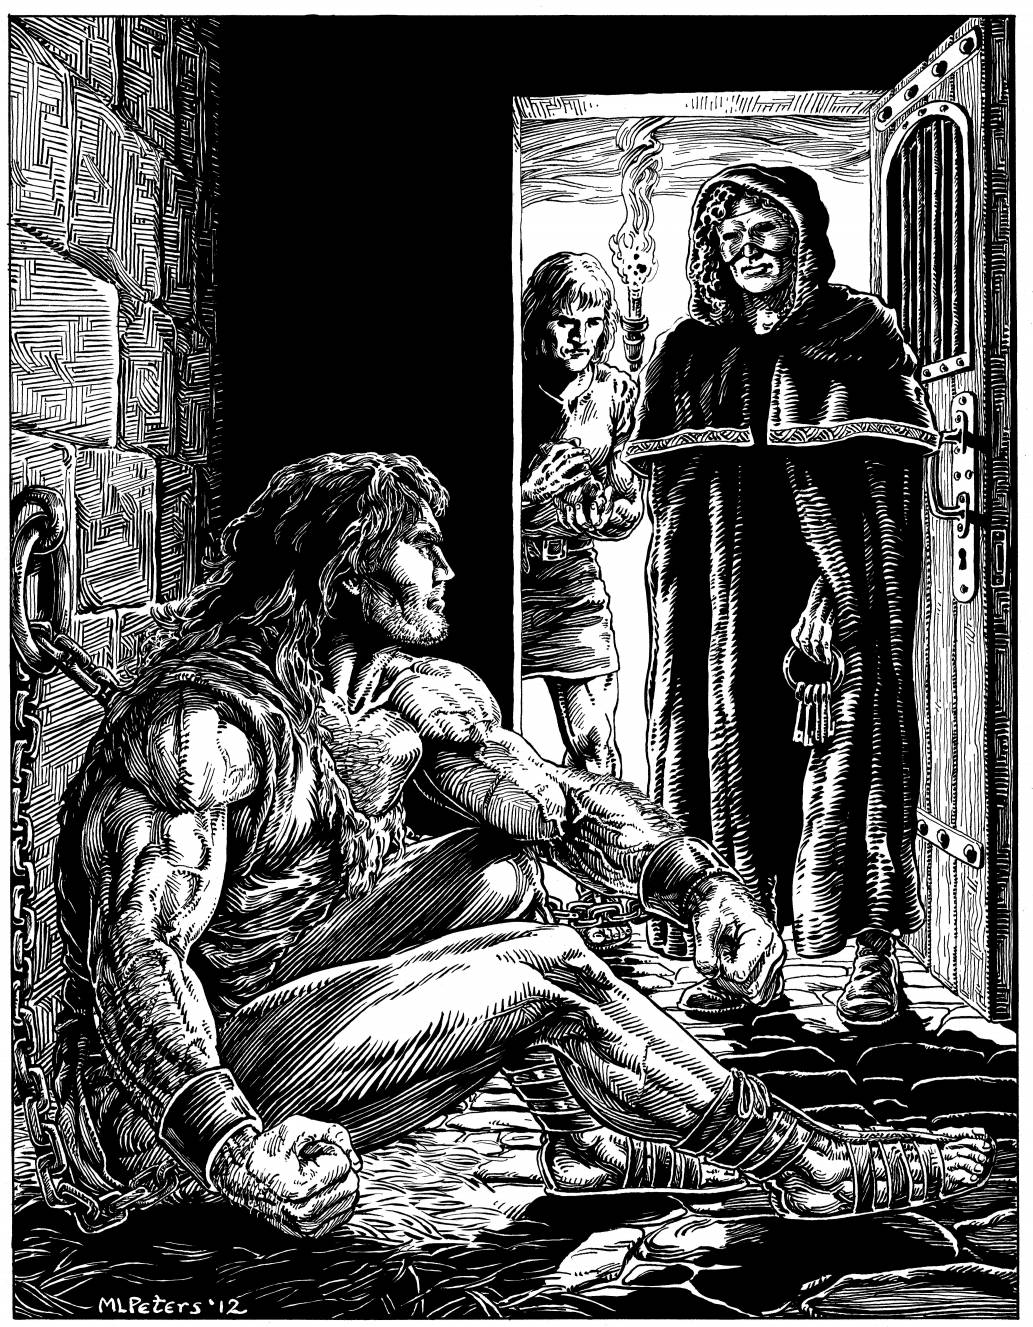 Conan: Rogues in the House by Robert E. Howard - Part 1 (of 2) 